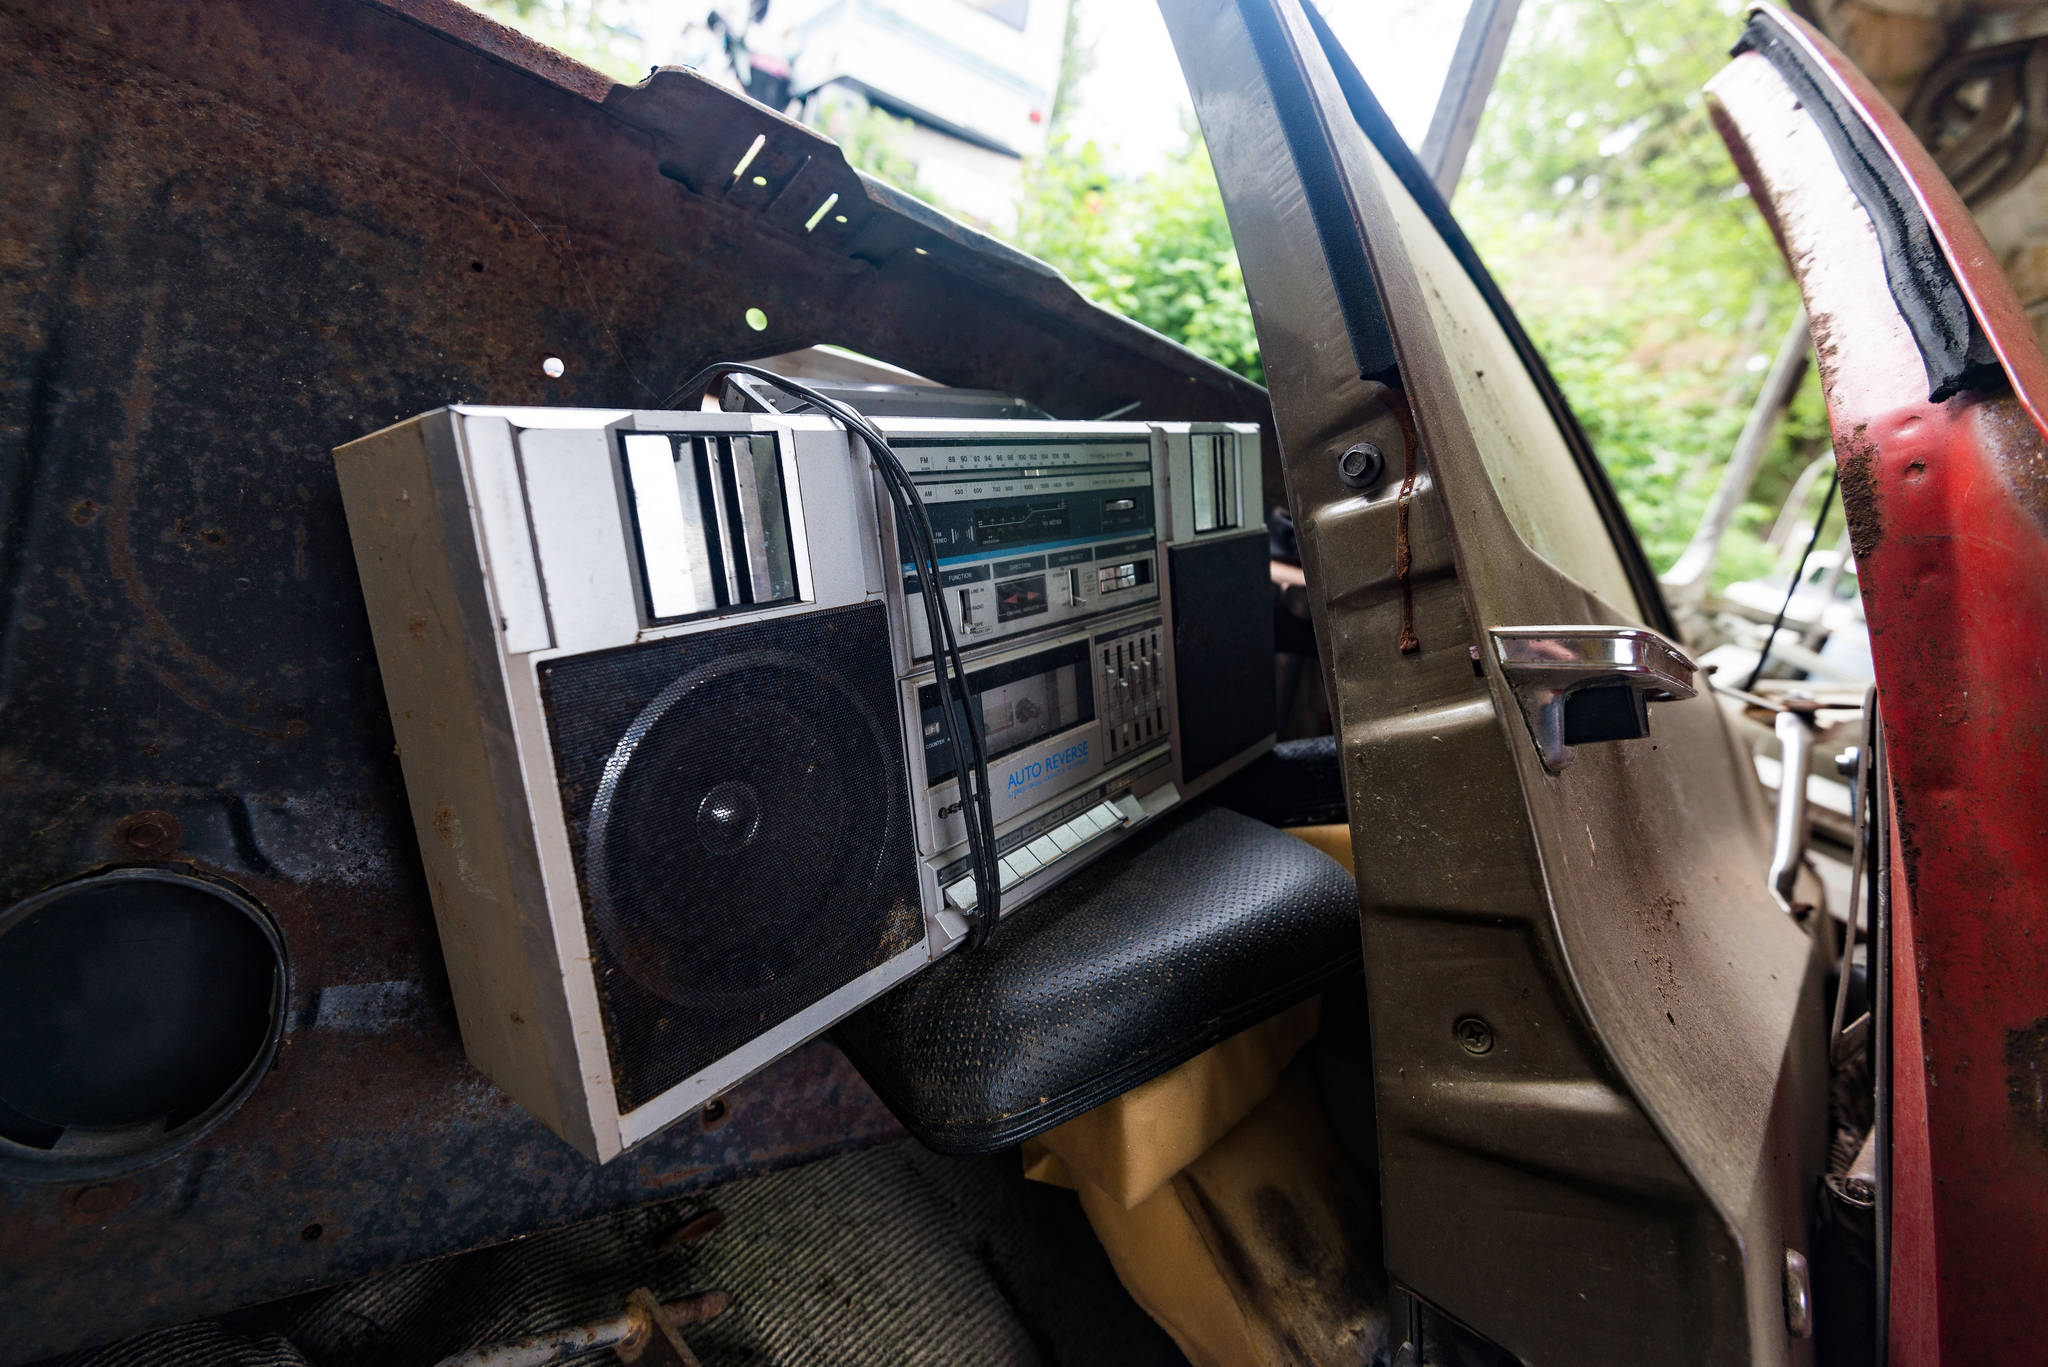 A boombox, in relatively good condition, is found wedged between the bare interior of a bus and two separated car doors. Photo by Caean Couto